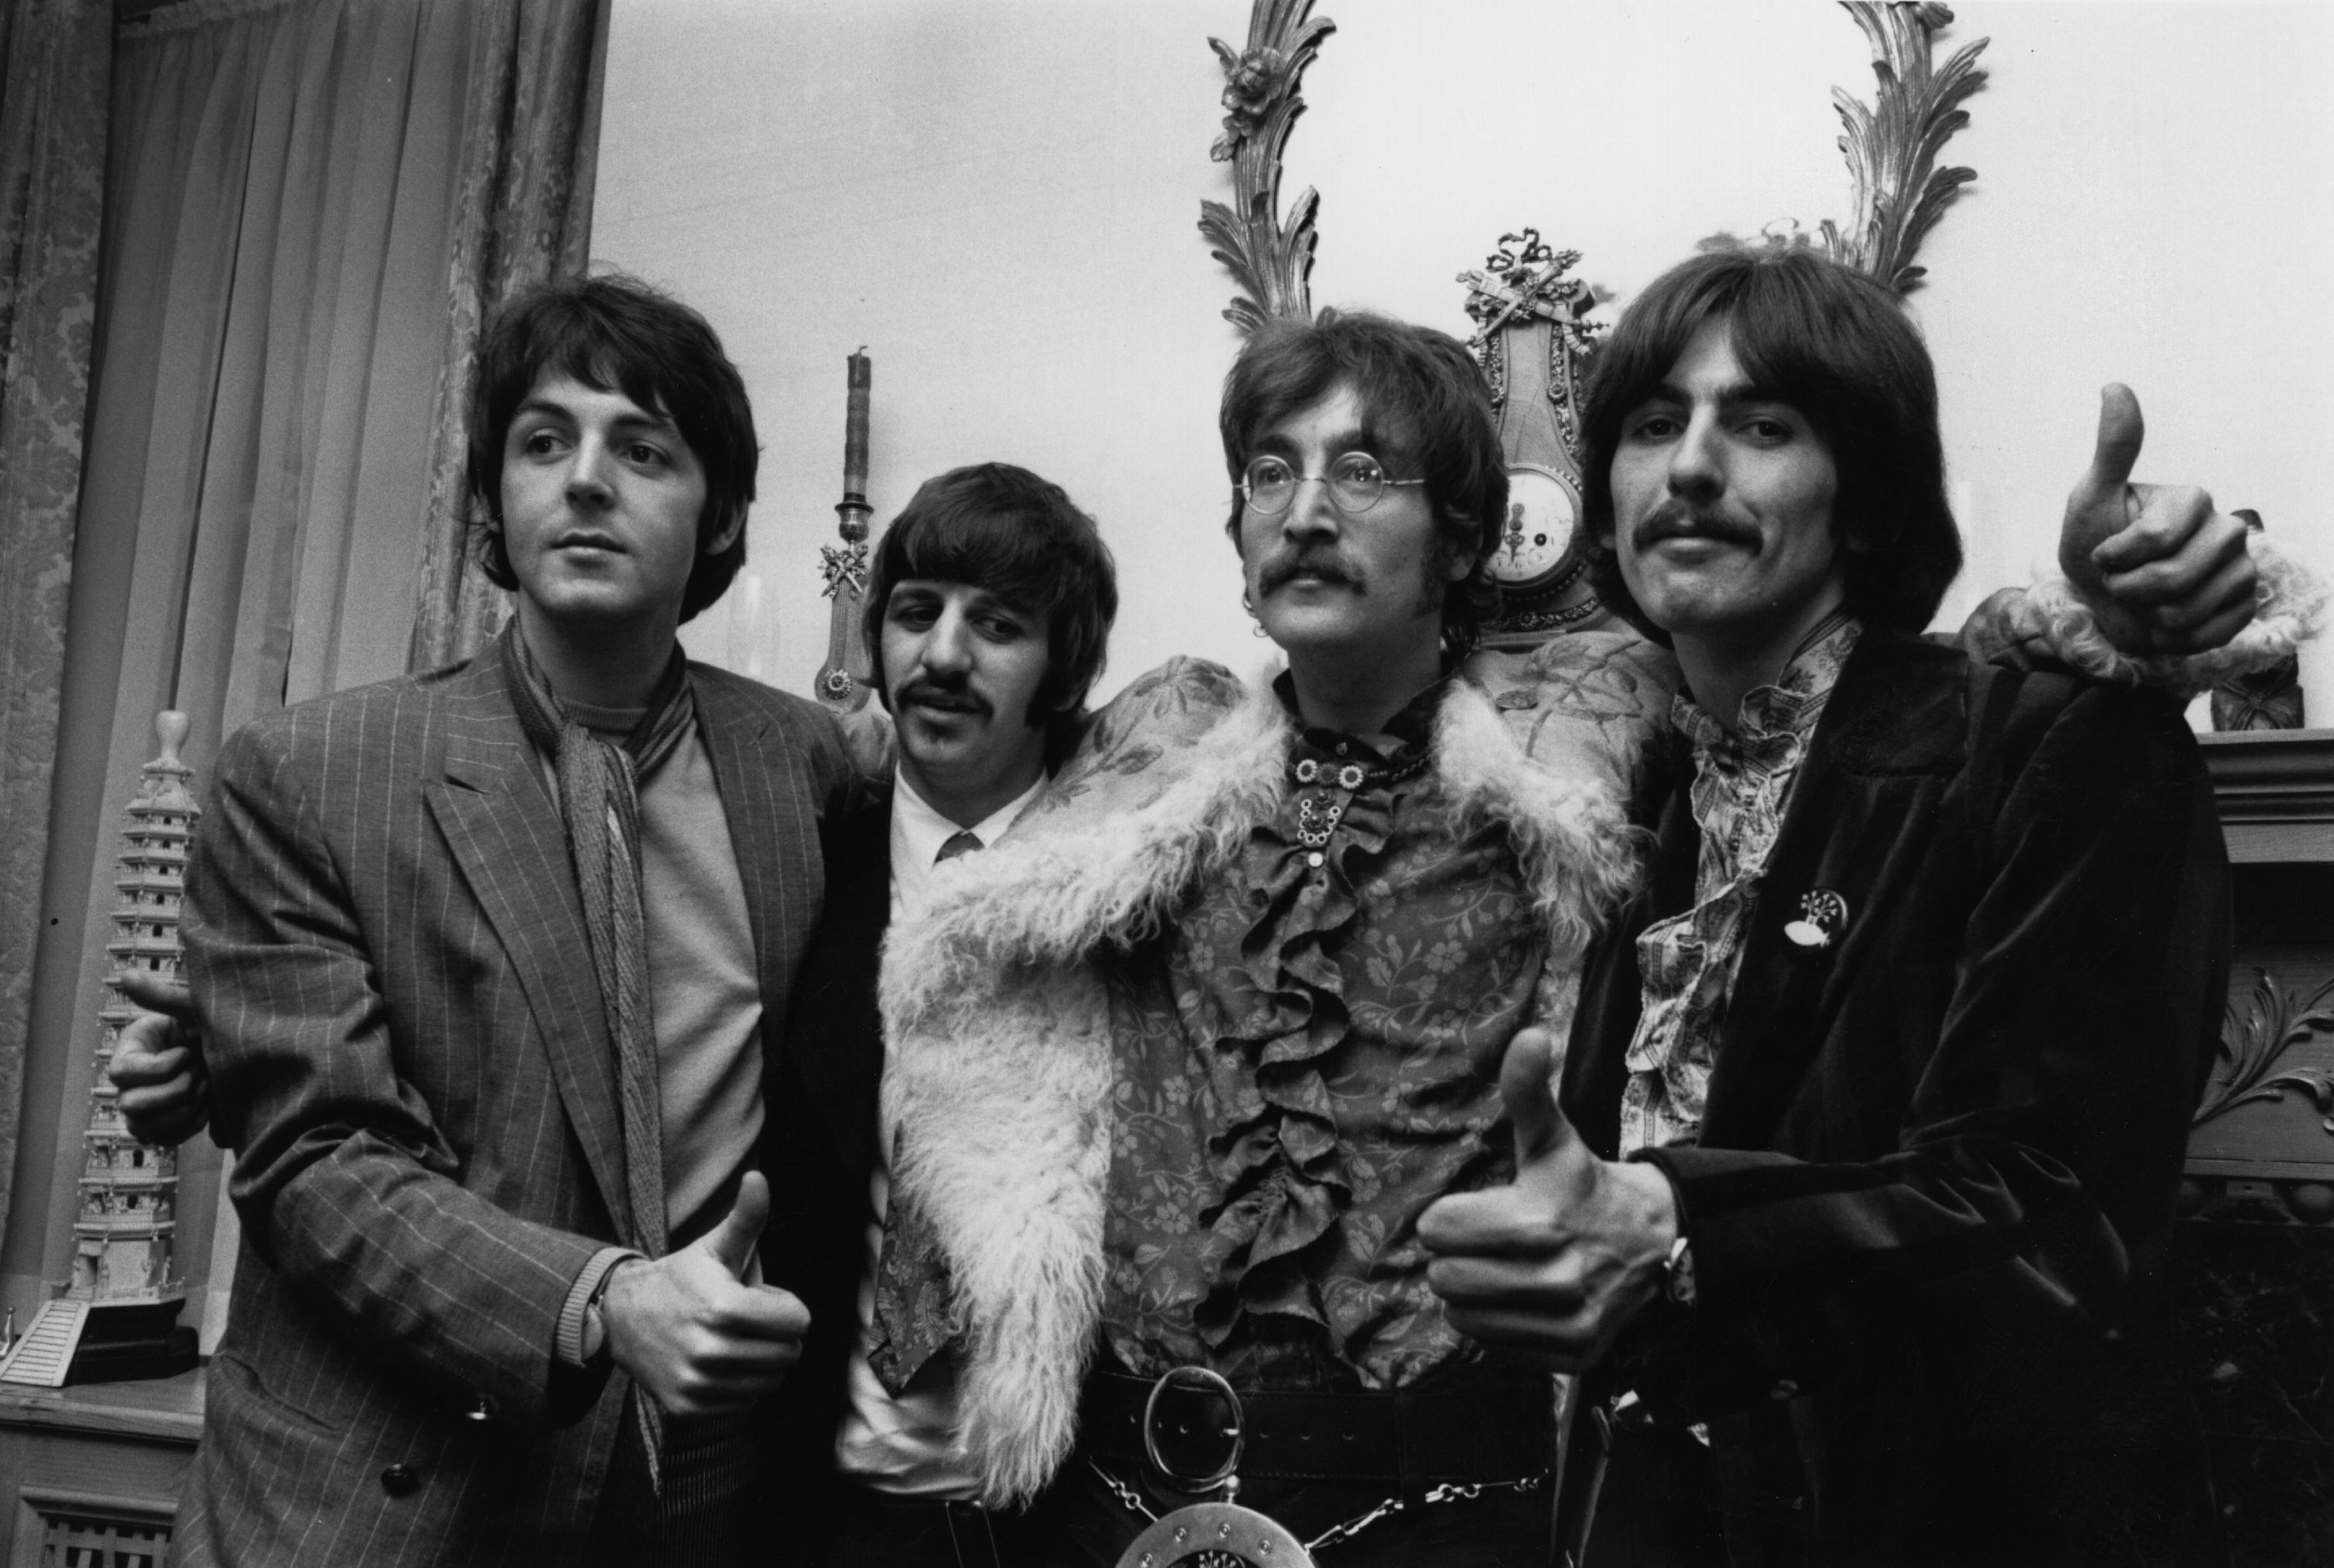 The Beatles attend the photocall for the launch of their album Sgt. Pepper's Lonely Hearts Club Band